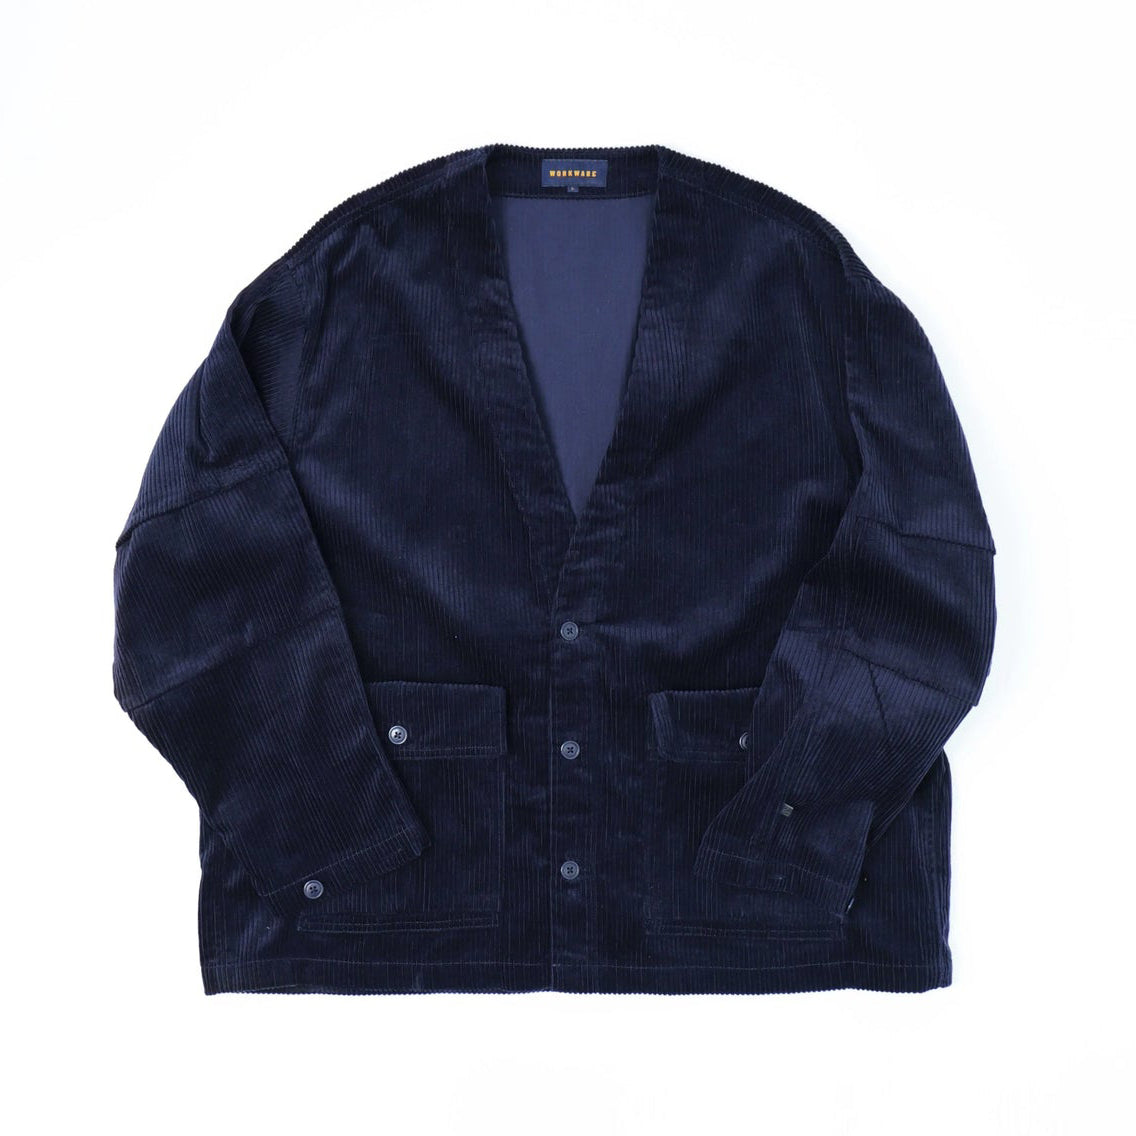 No:#592 | Name:FW23-RAILROAD CARDIGAN | Color:Navy | Size:M/L【WORKWARE】【入荷予定アイテム・入荷連絡可能】